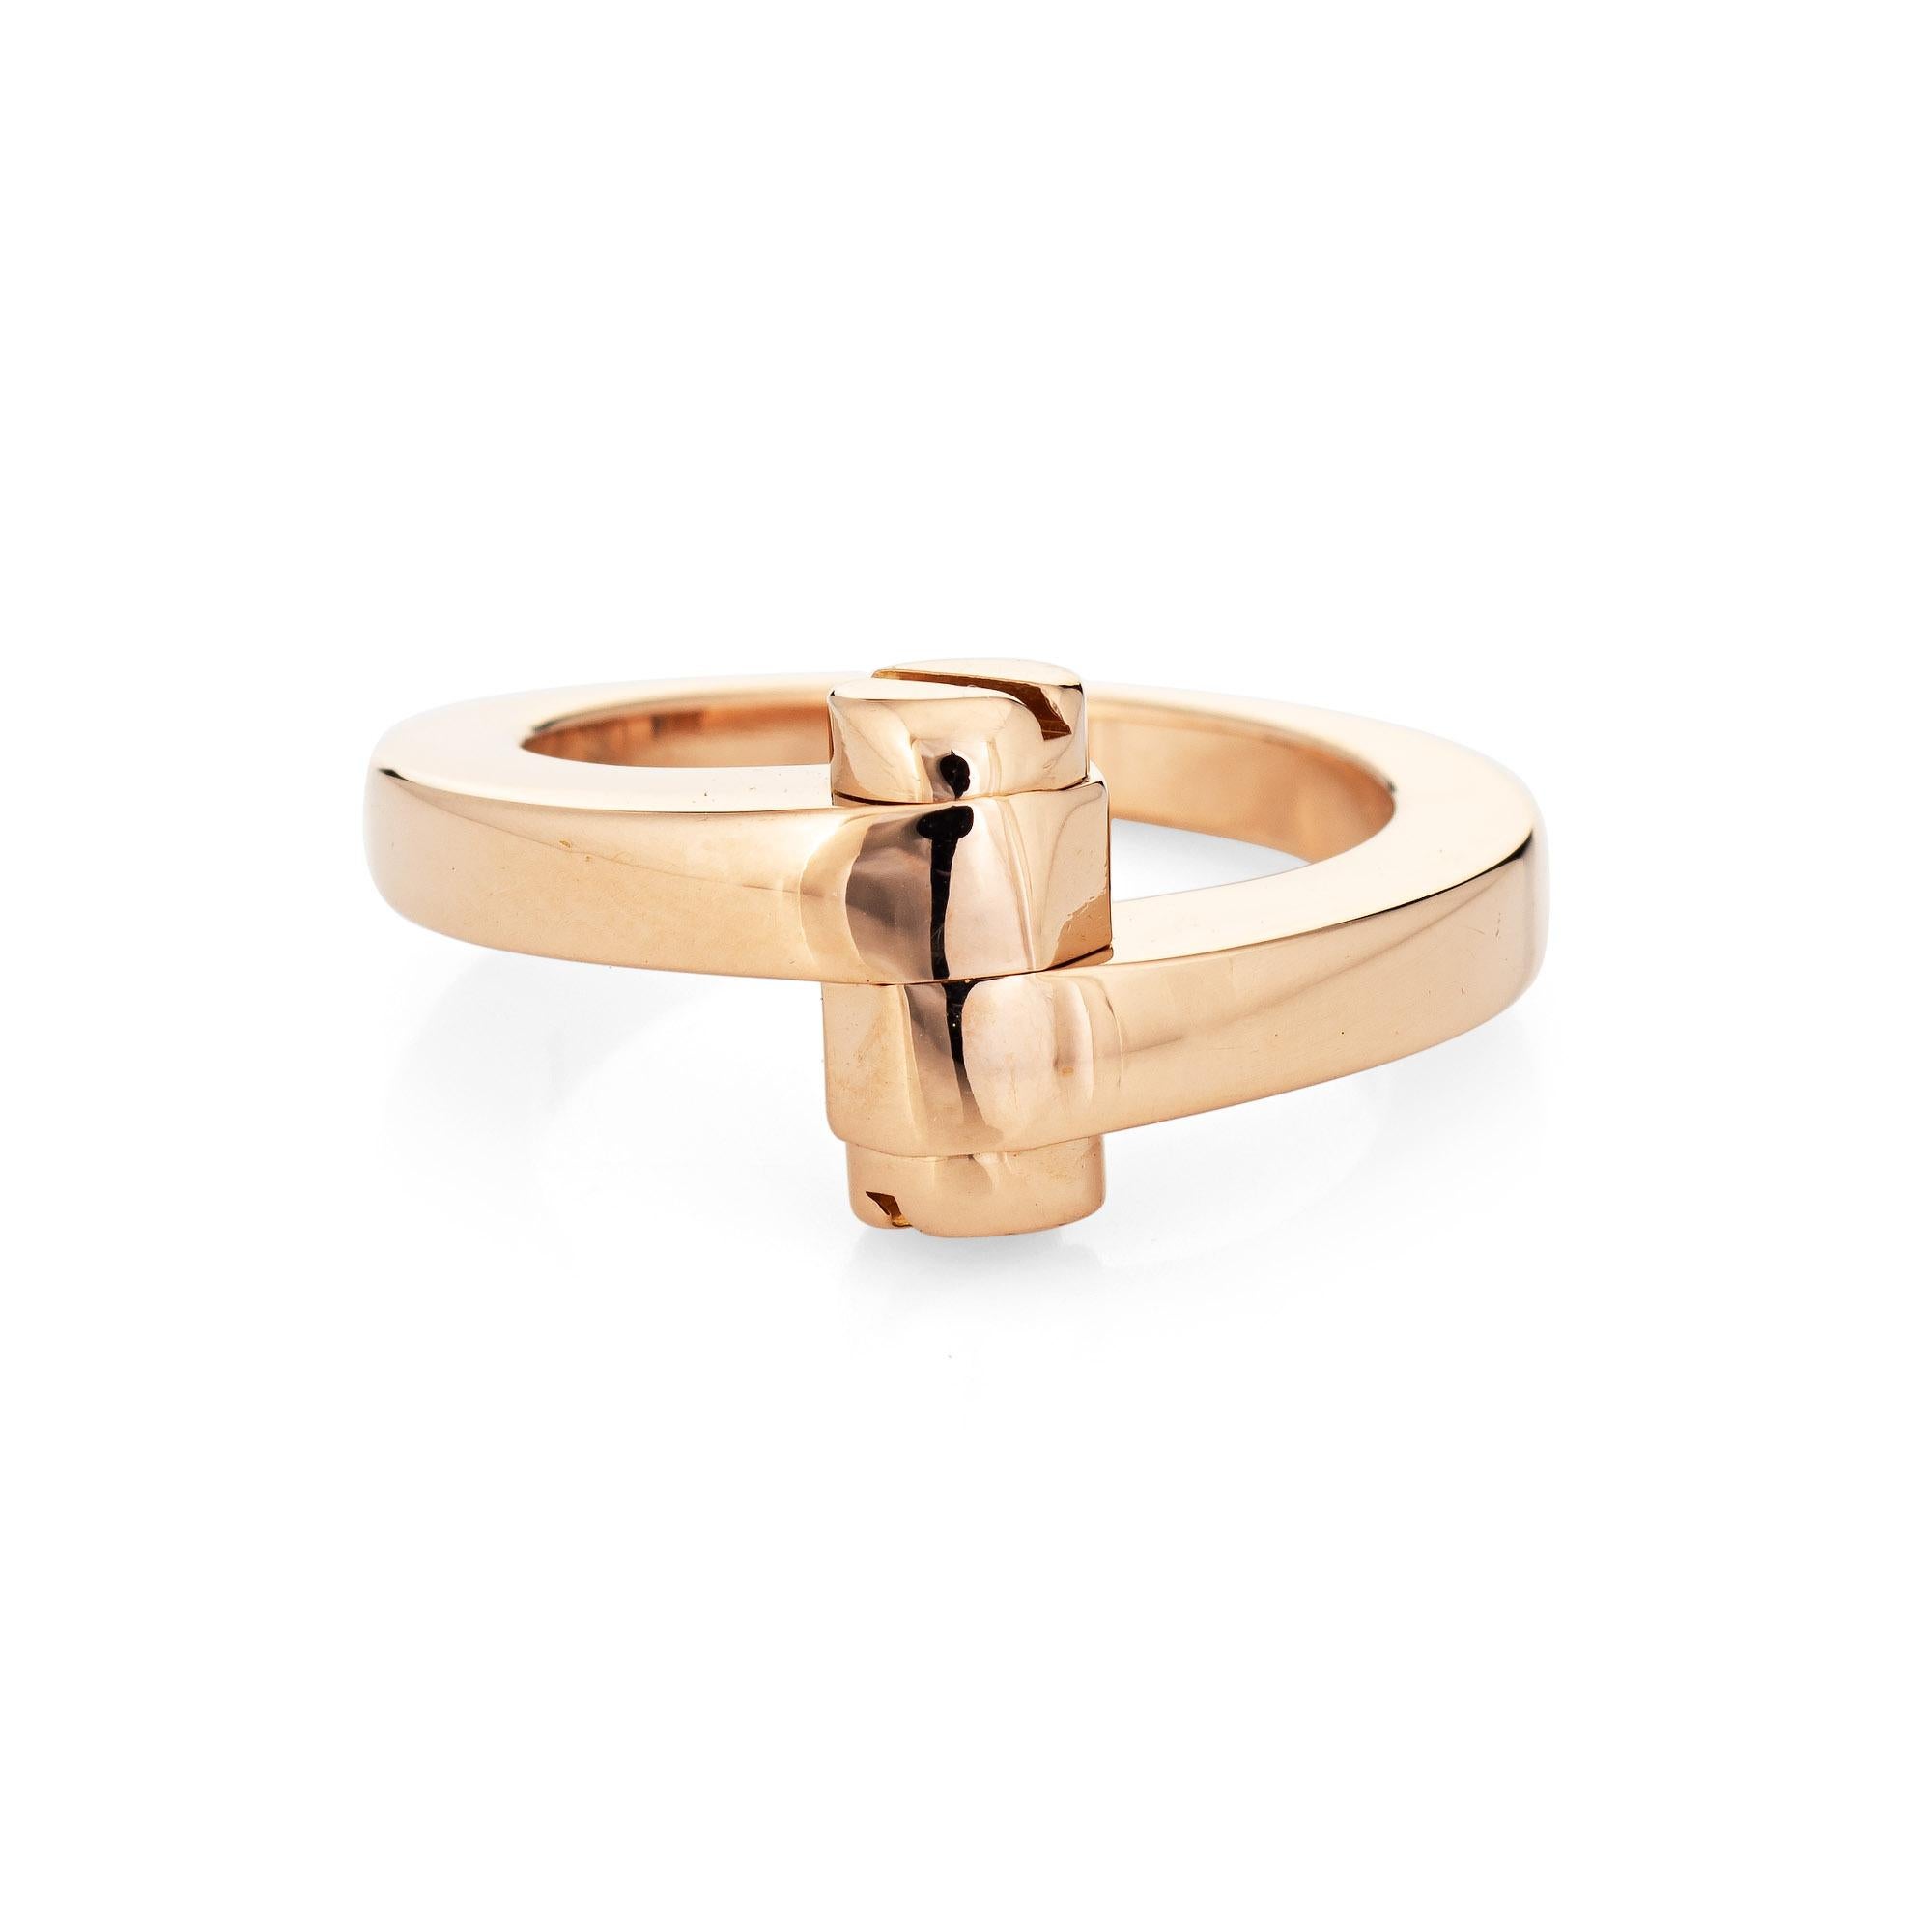 Out of production vintage Cartier 'Menotte' ring crafted in 18k rose gold (circa 1990s).  

The iconic Cartier ring features a bypass design, terminating with two screw head motifs.  The ring is great worn alone or layered with your fine jewelry